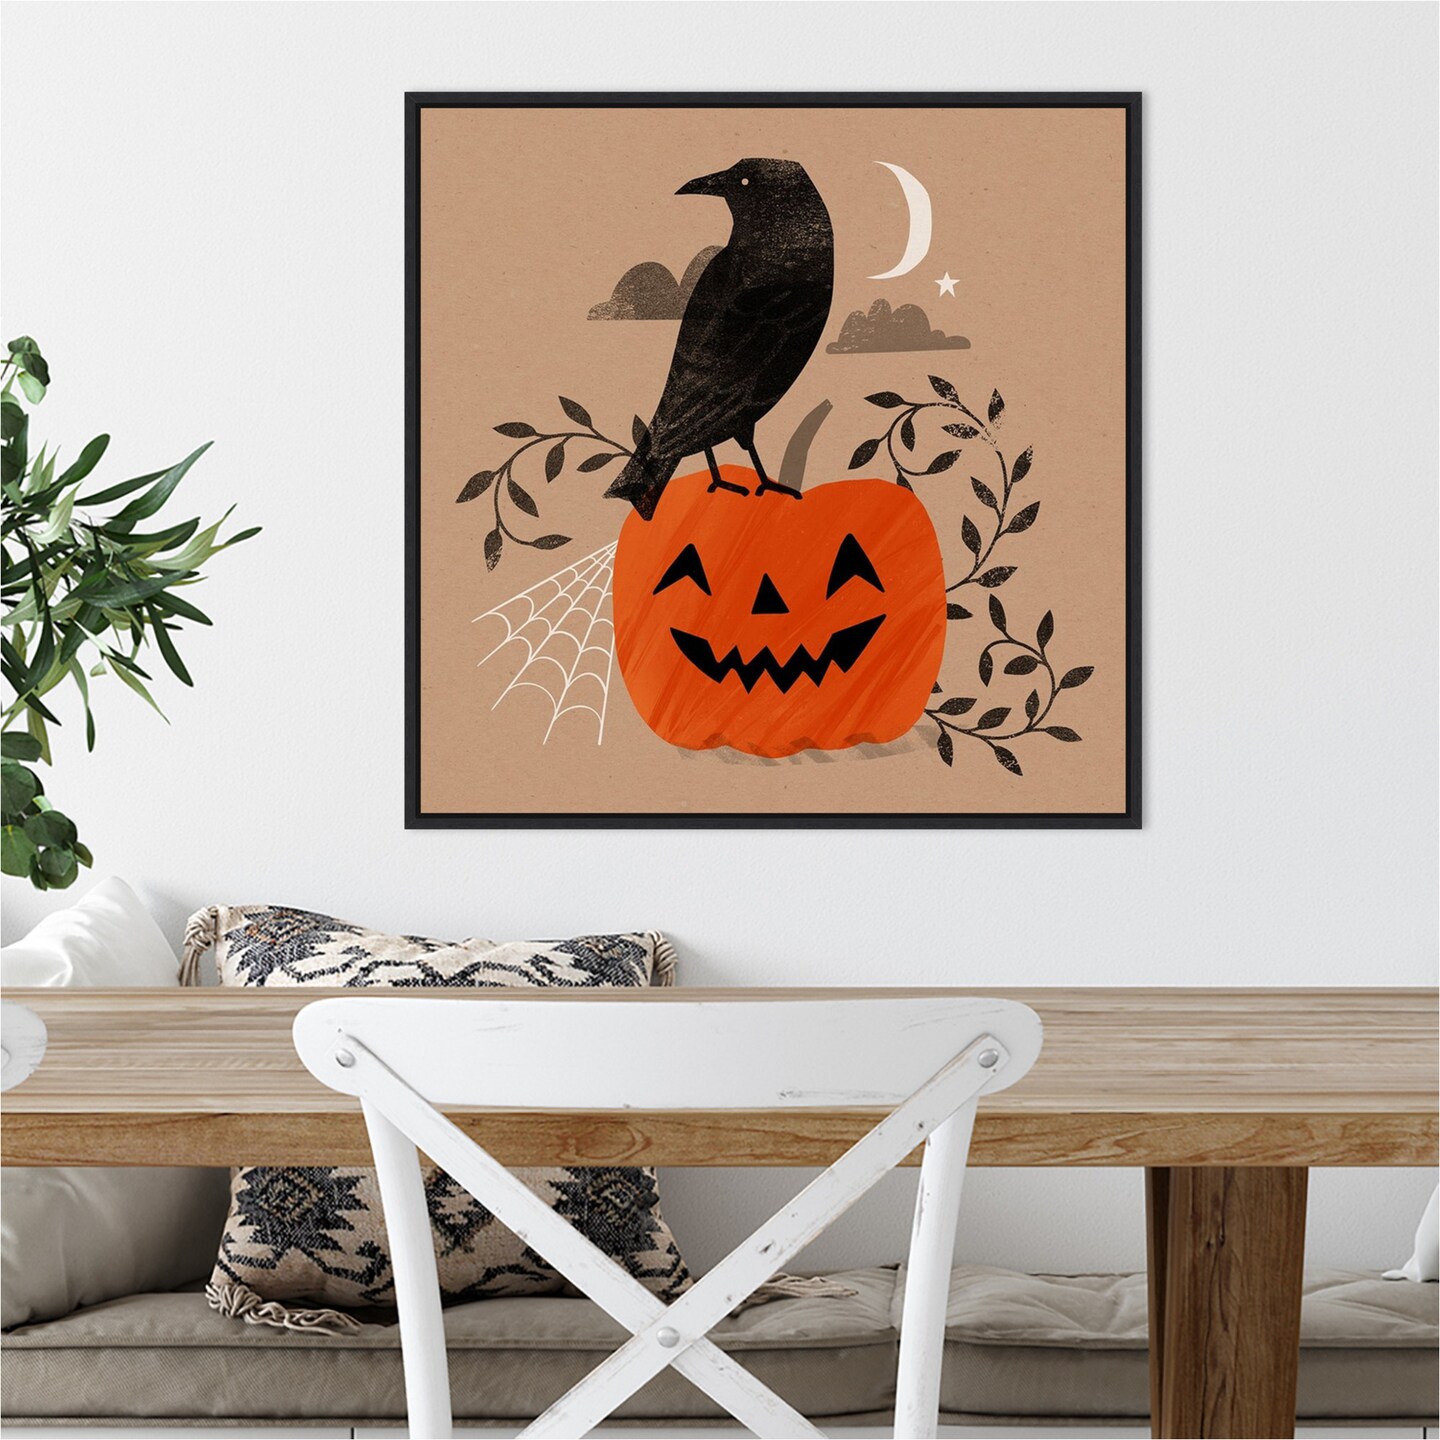 Halloween Crow Graphic II by Victoria Barnes 22-in. W x 22-in. H. Canvas Wall Art Print Framed in Black